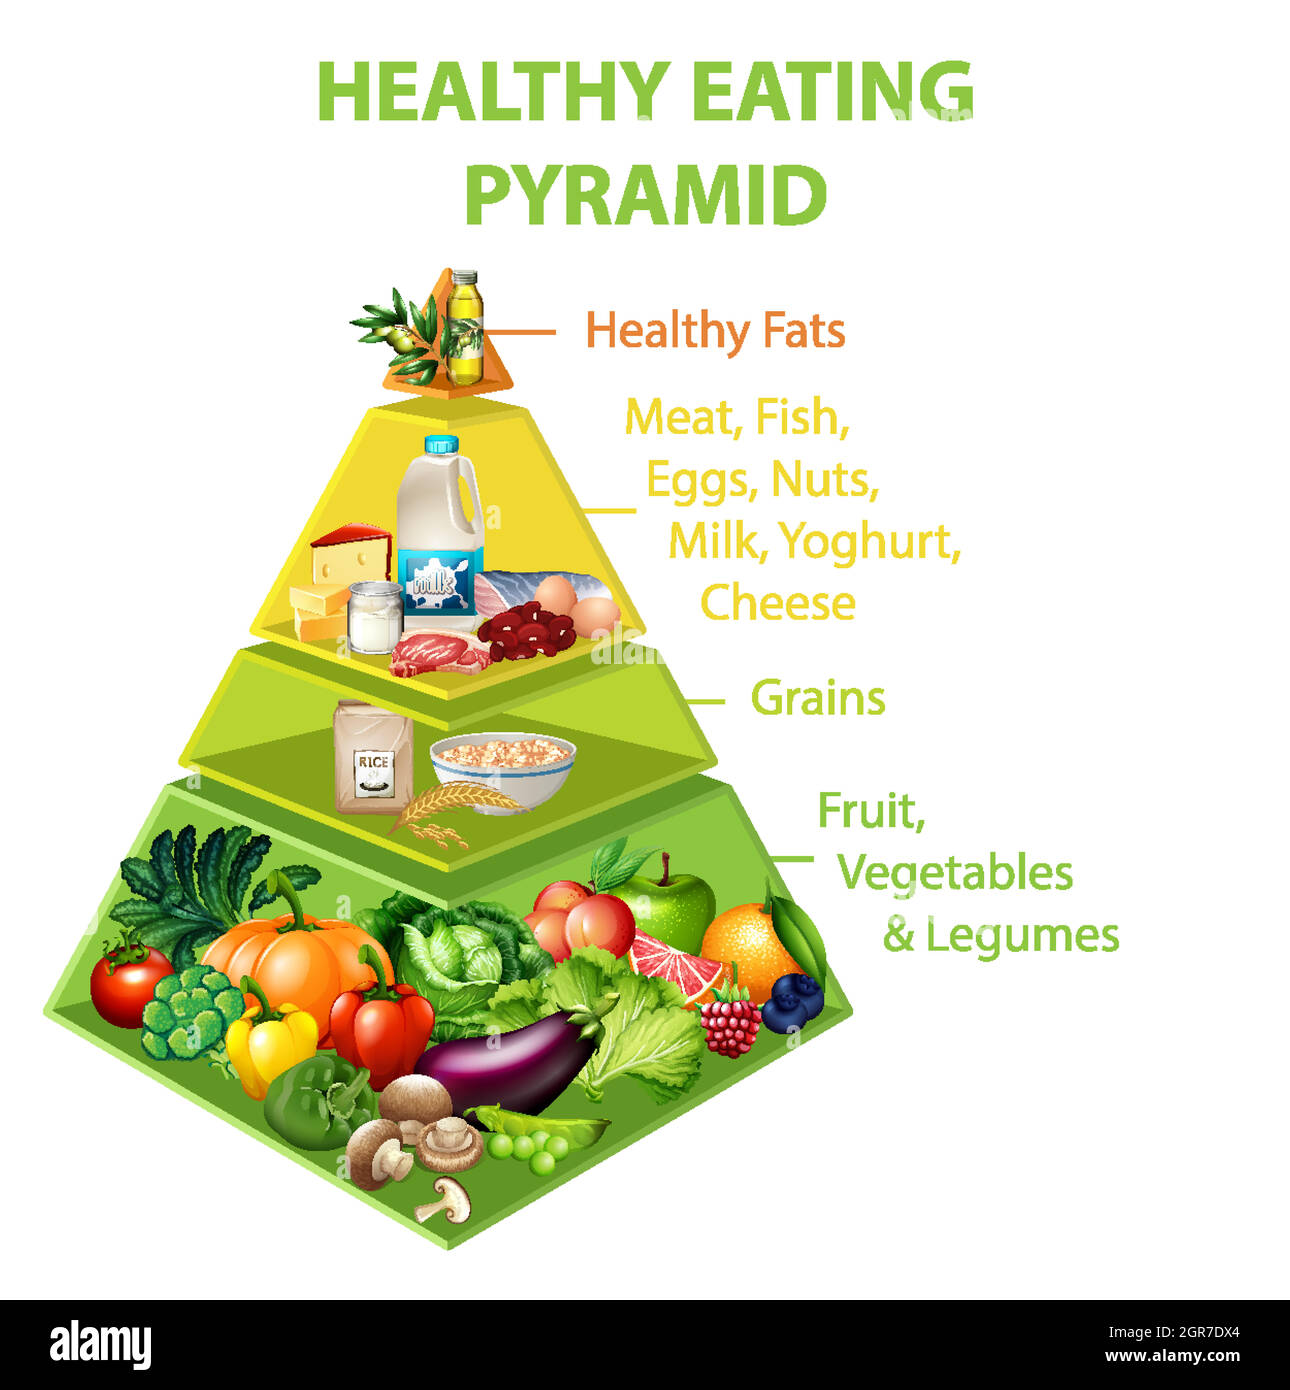 Healthy Eating and New Year Resolutions
